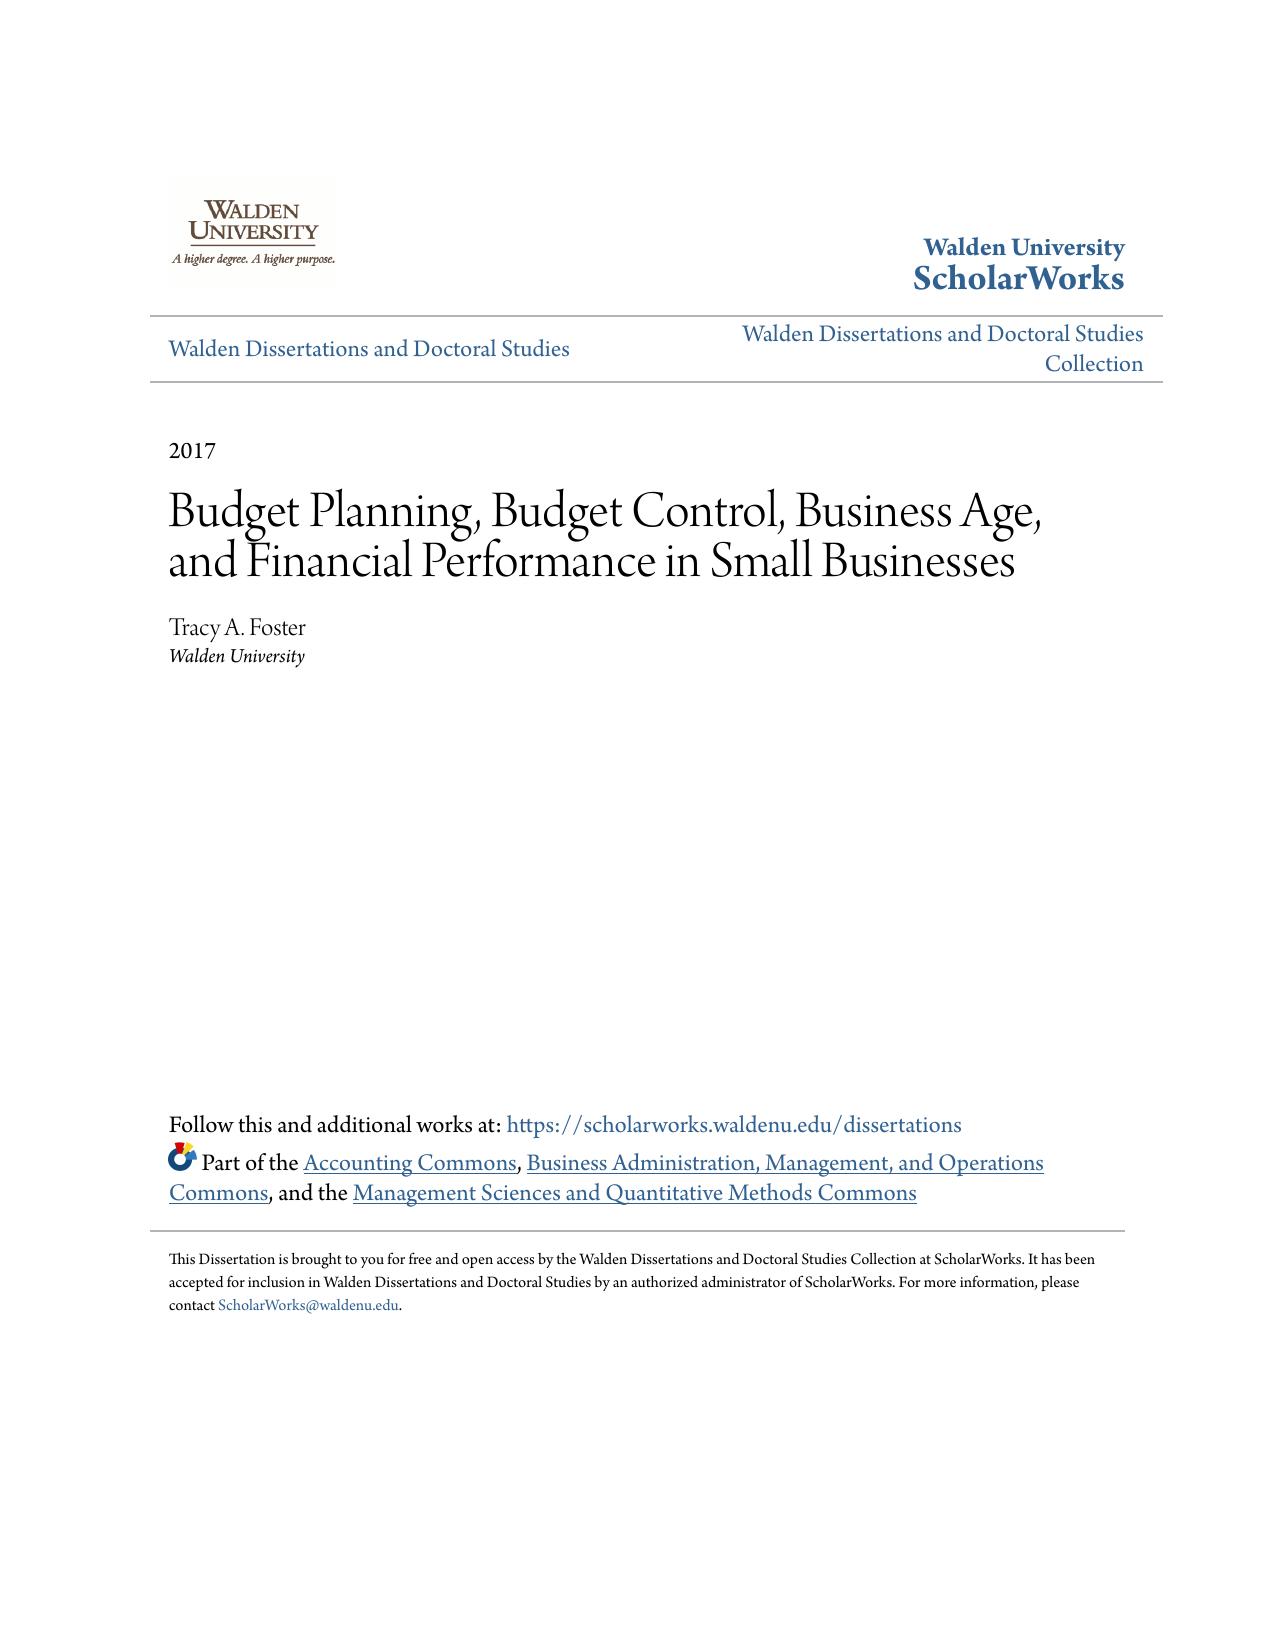 Budget Planning, Budget Control, Business Age, and Financial Performance in Small Businesses